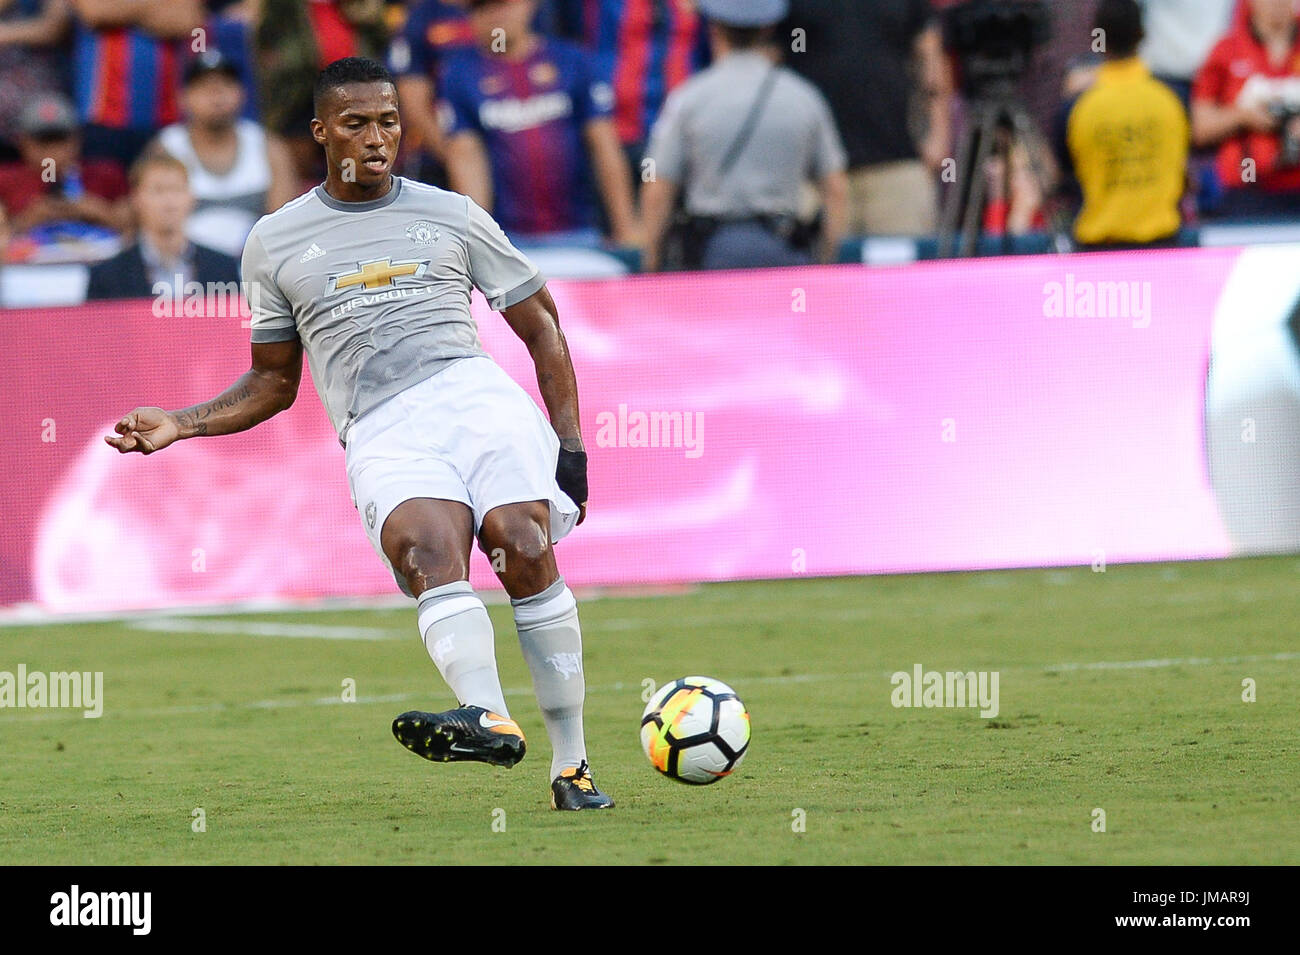 Landover, Maryland, USA. 26th July, 2017. Manchester United's ANTONIO VALENCIA (25) in action during the first half of the game held at FEDEXFIELD in Landover, Maryland. Credit: Amy Sanderson/ZUMA Wire/Alamy Live News Stock Photo